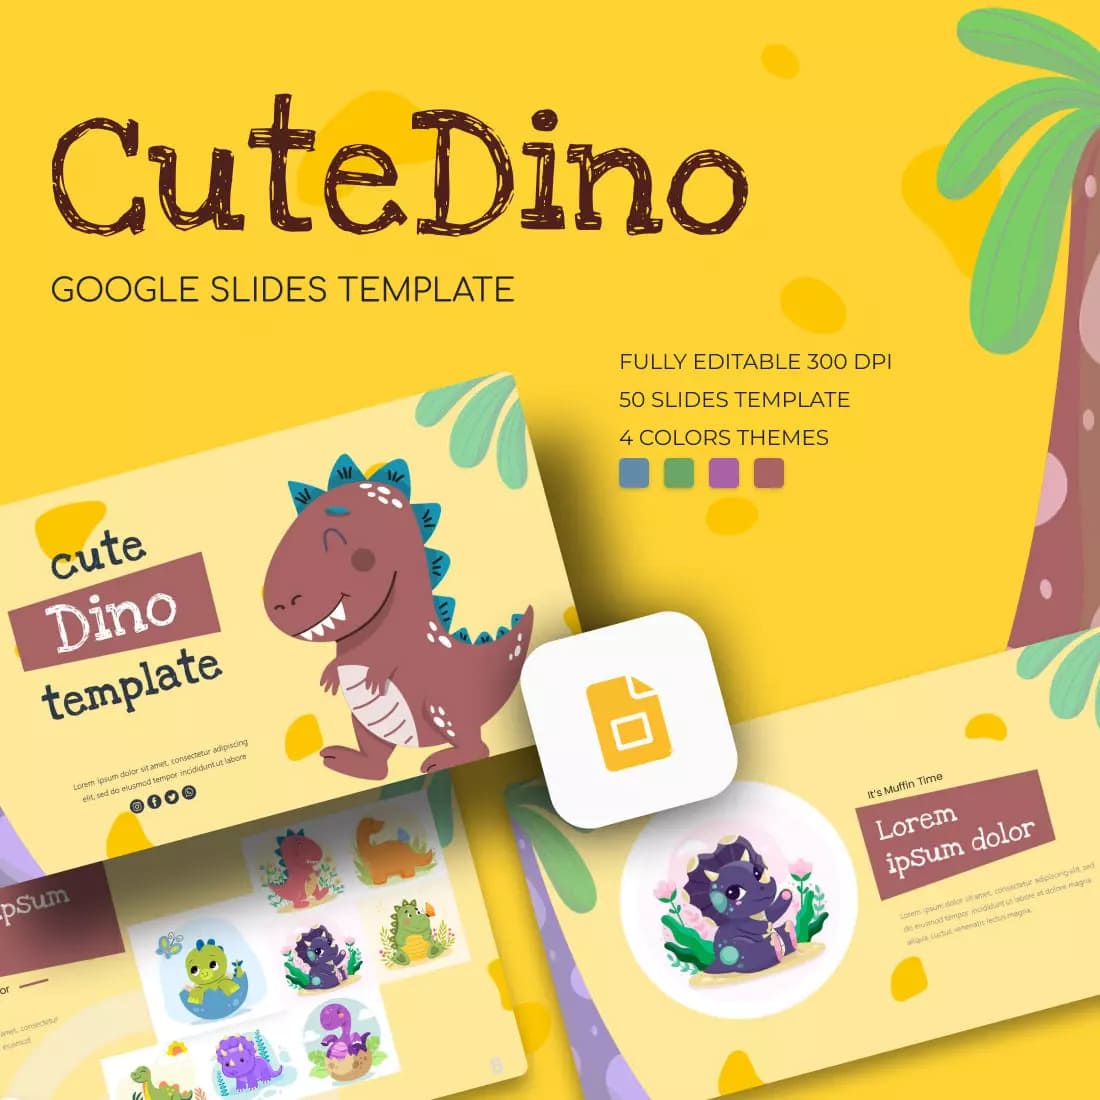 Cute Dino Google Slides Template Preview 5.